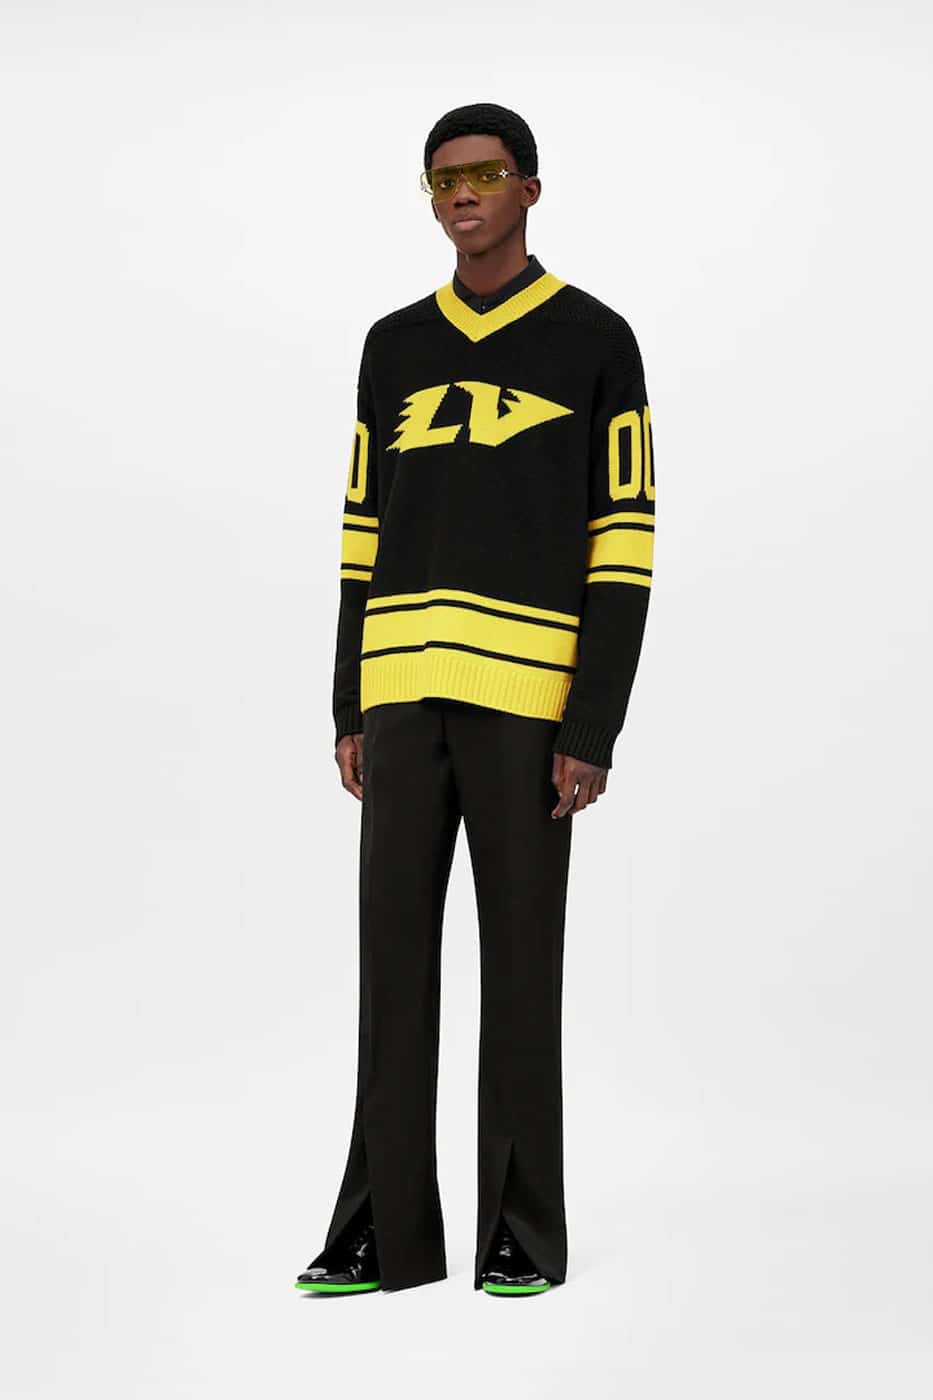 Louis Vuitton launches NFL-inspired selection - HIGHXTAR.